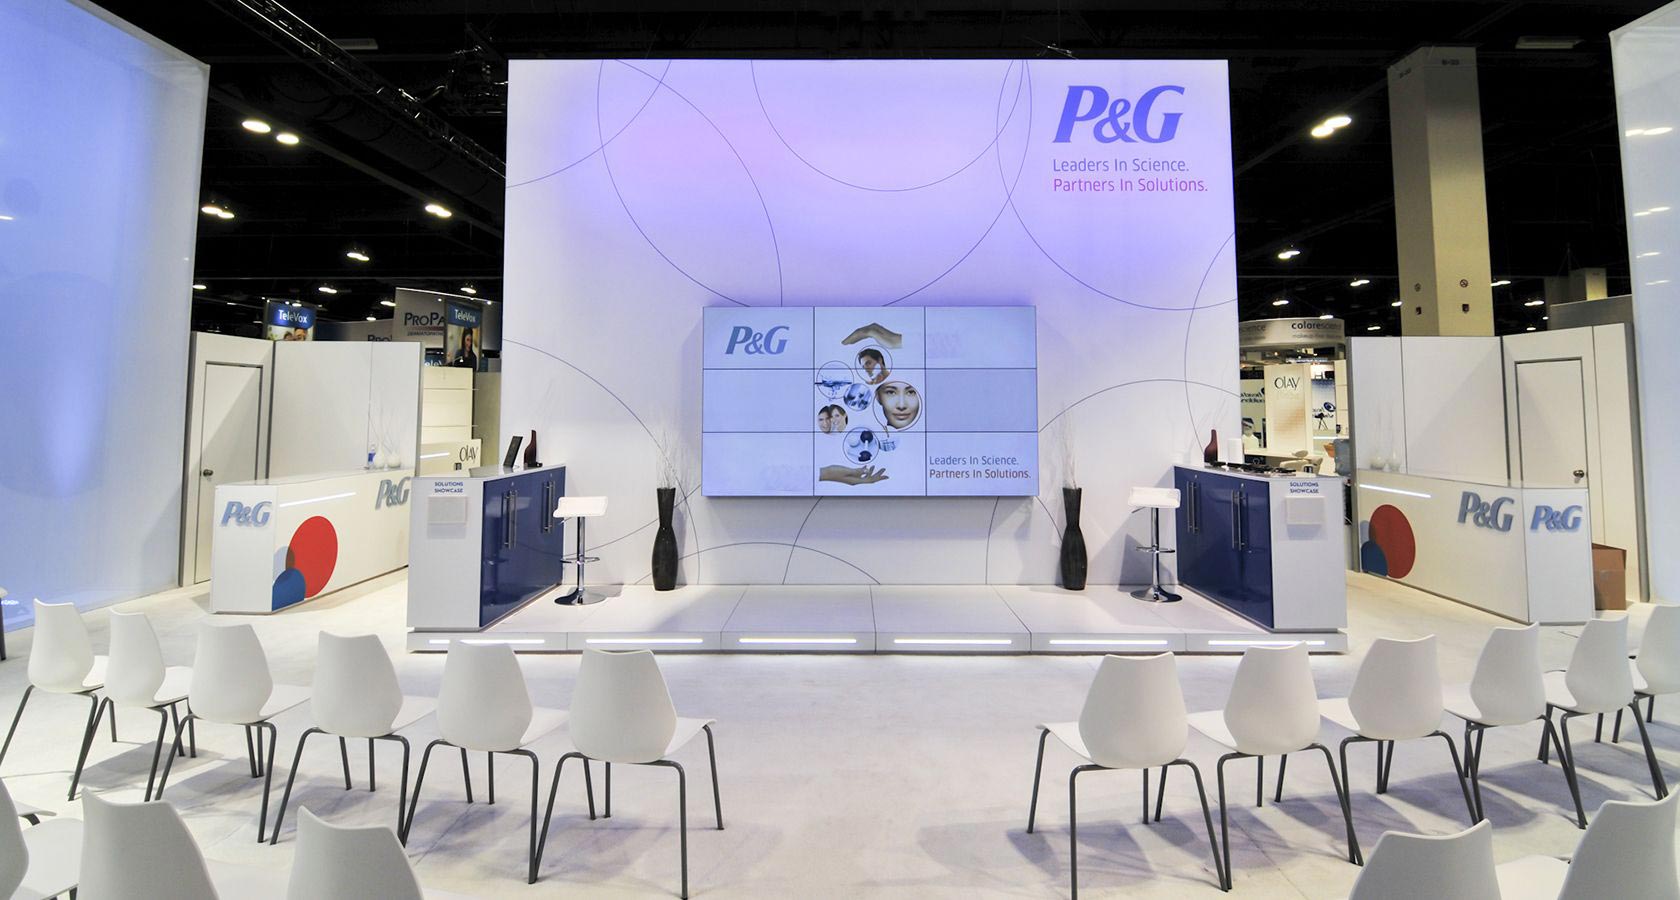 empty P&G conference area